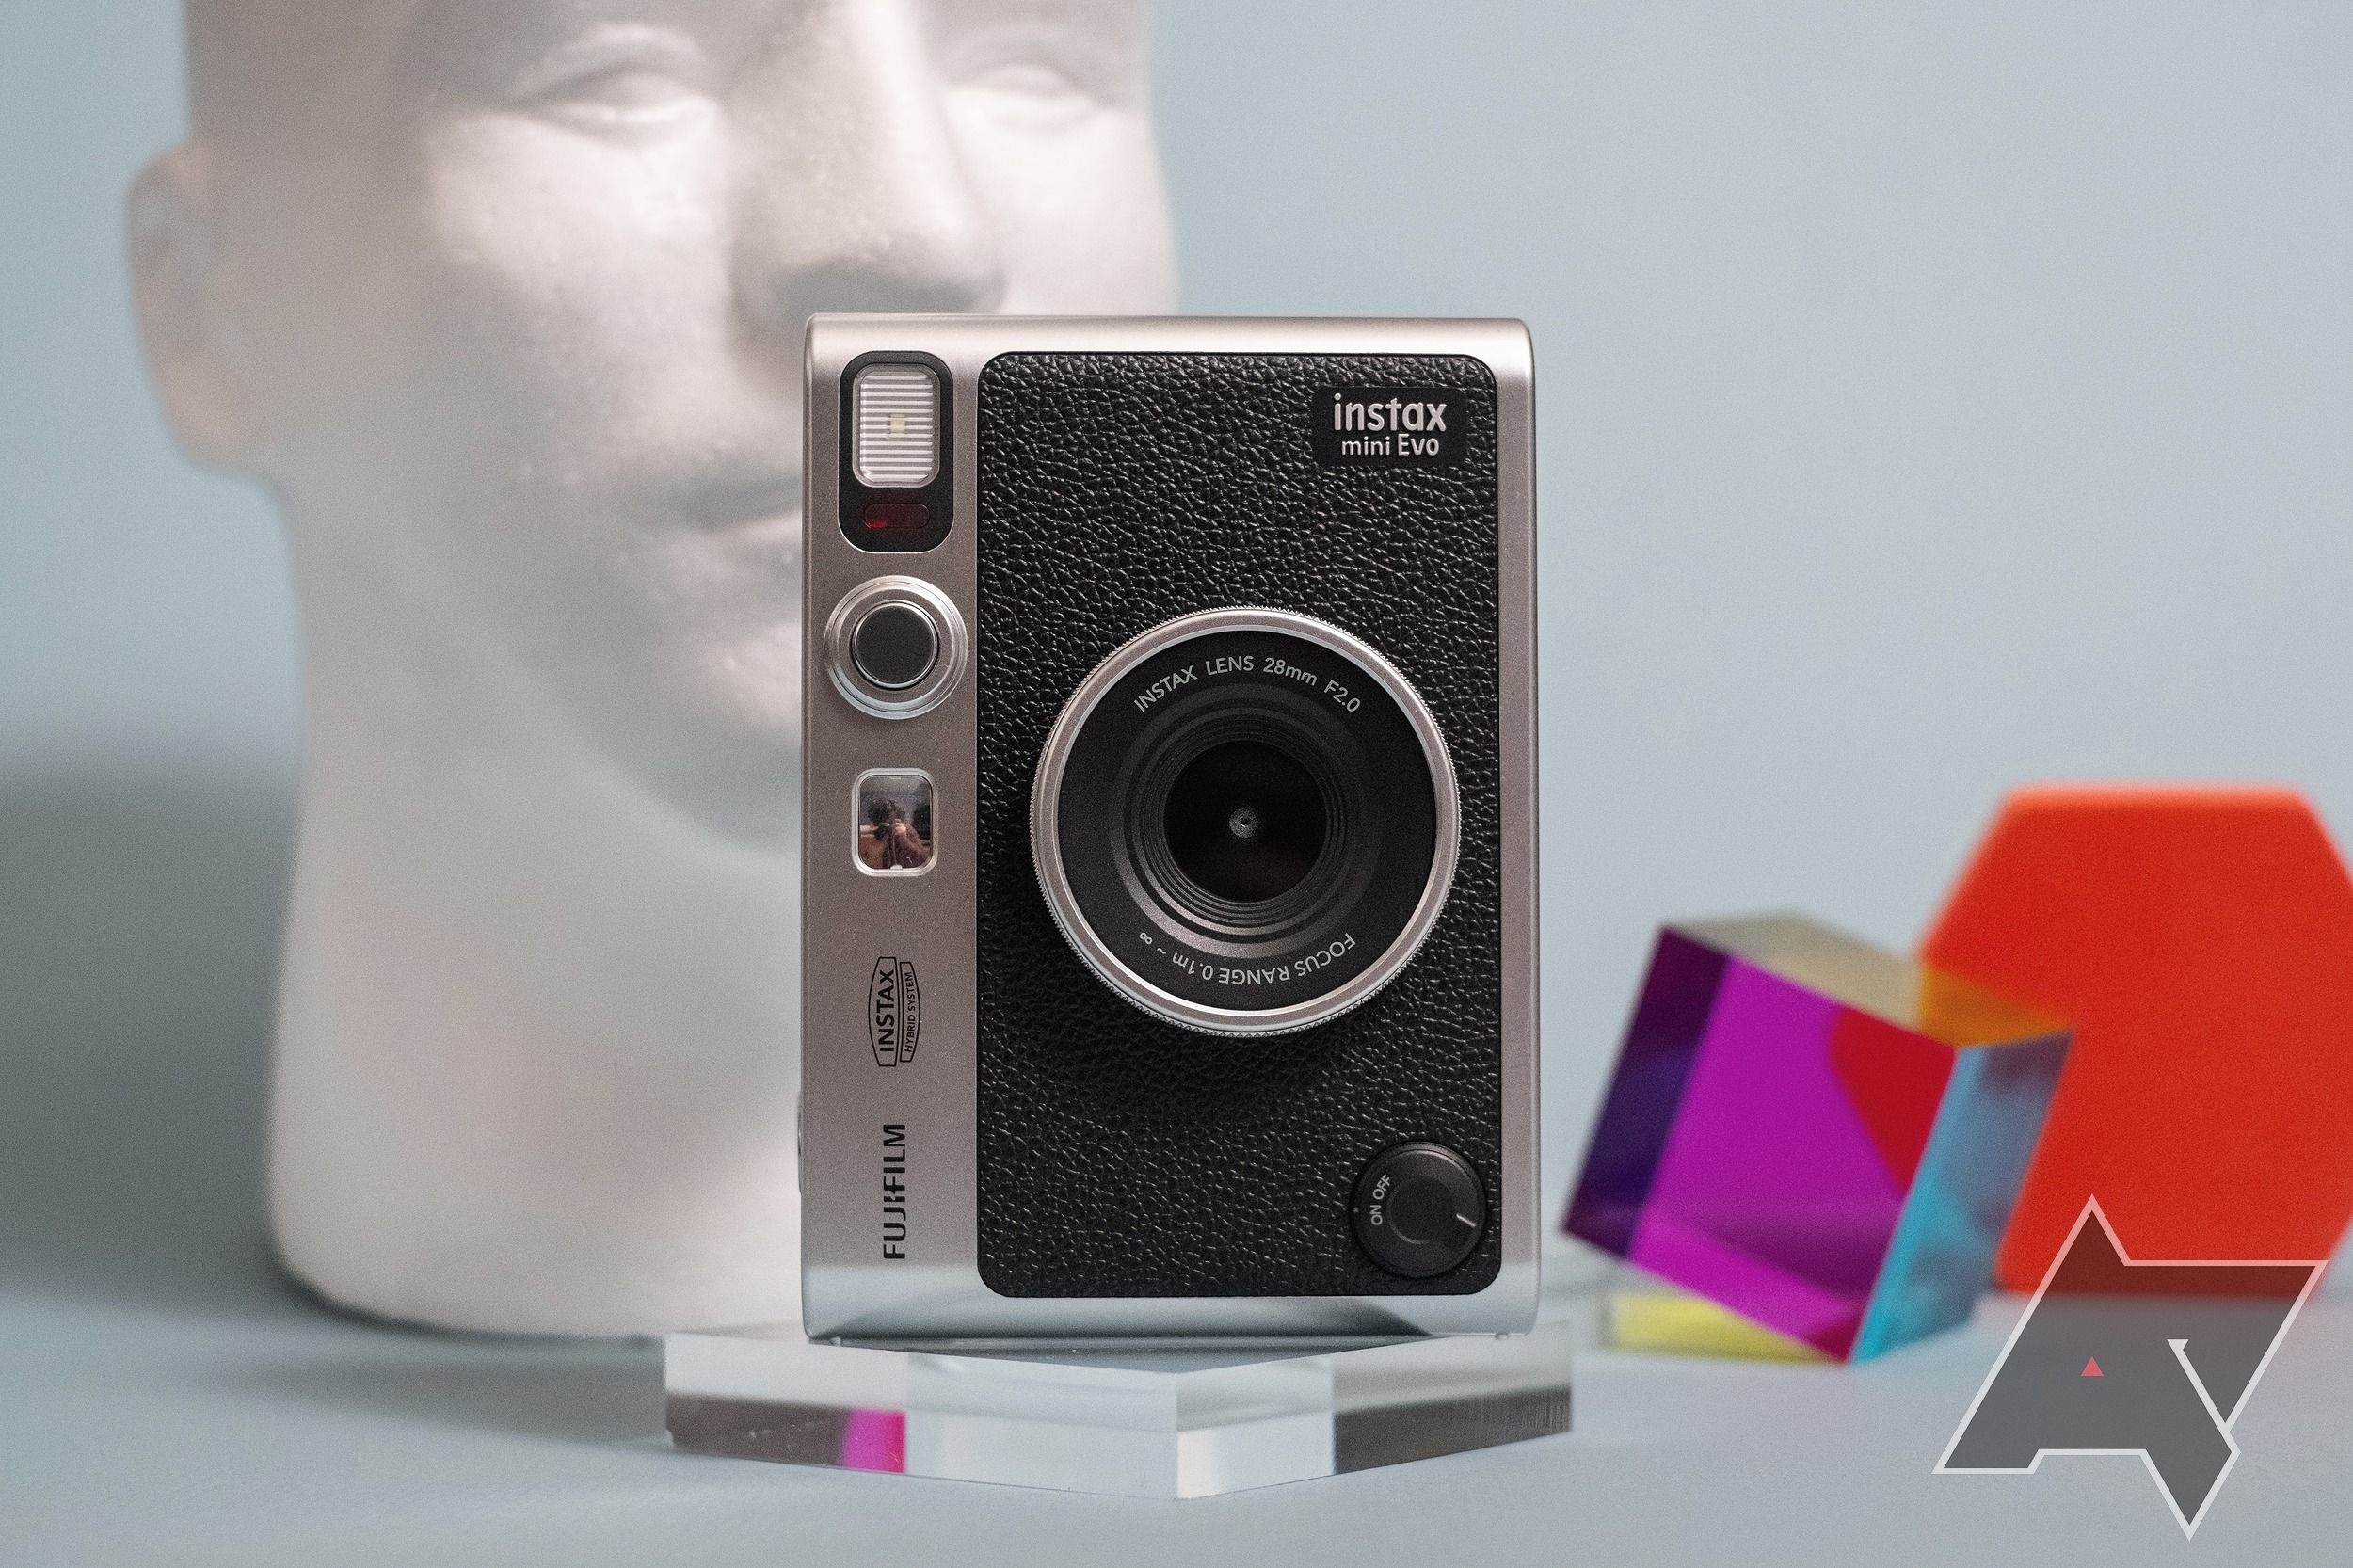 Fujifilm Instax Mini Evo Hands-on Review: Stylish, Practical and Fun